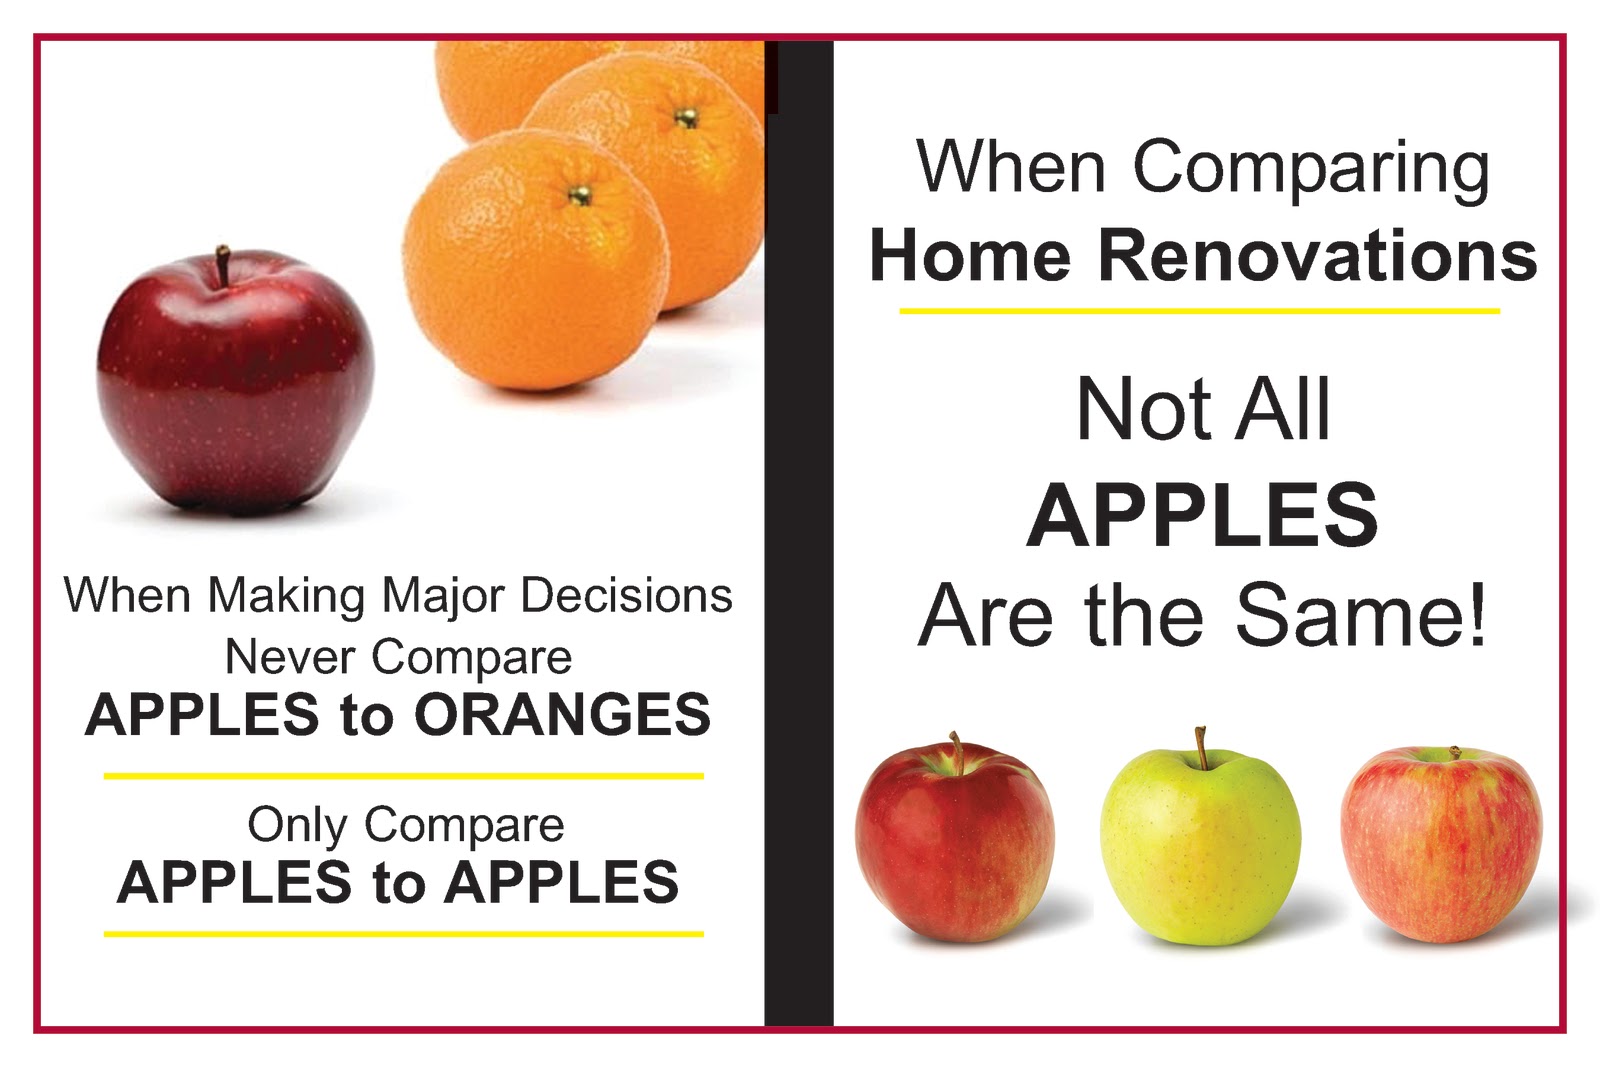 Comparatives Apples. Apple compare